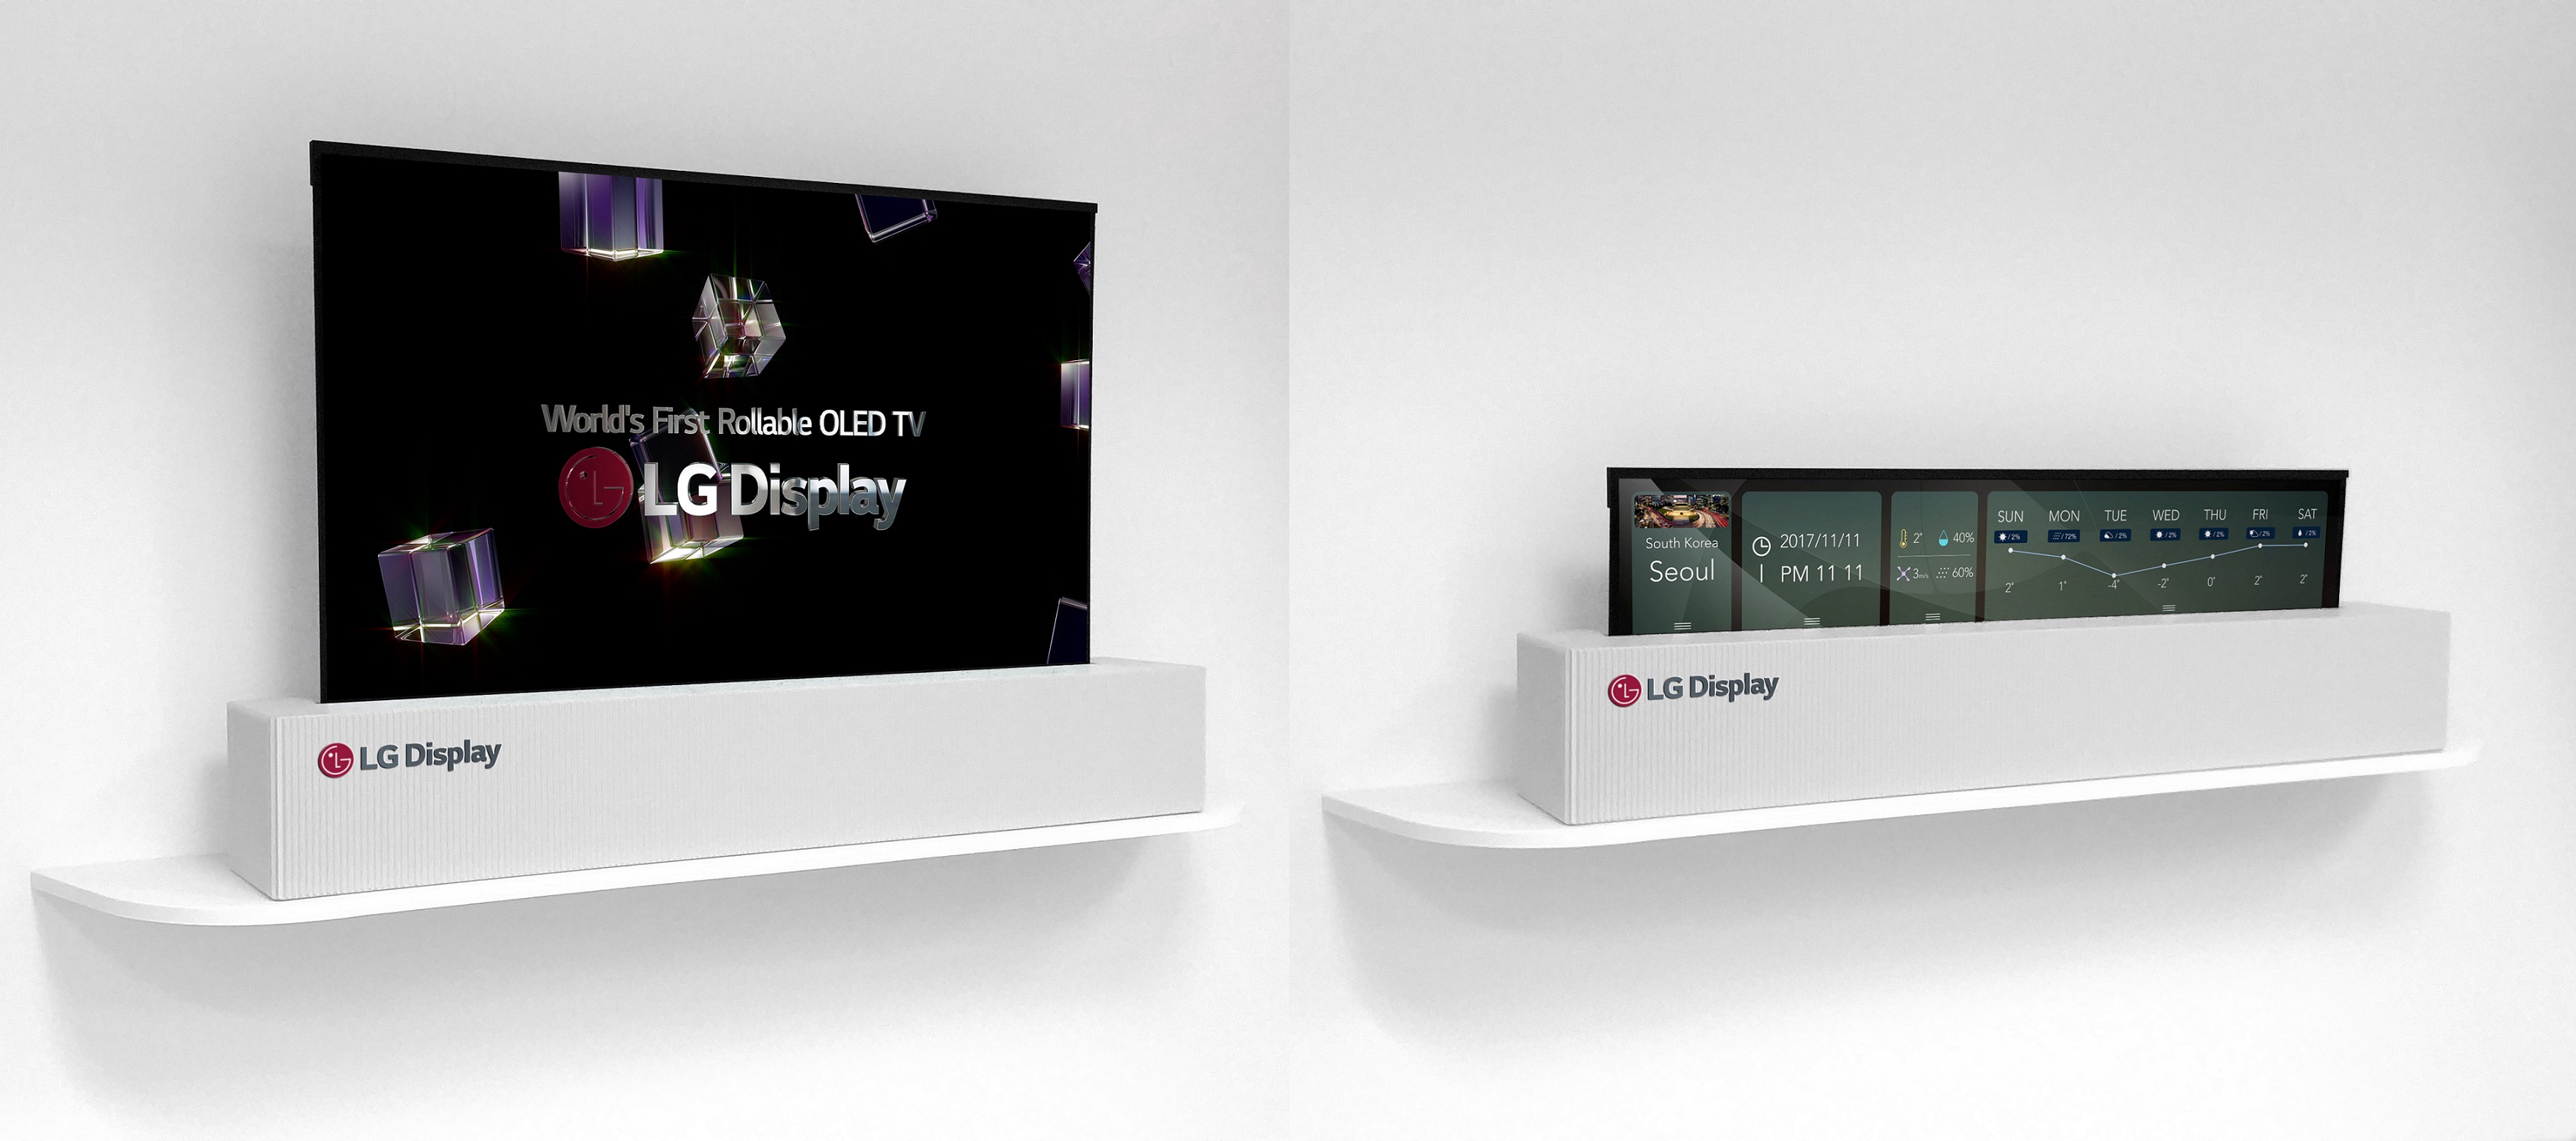 LG will make OLED TVs that roll up like posters a reality in 2019 – BGR